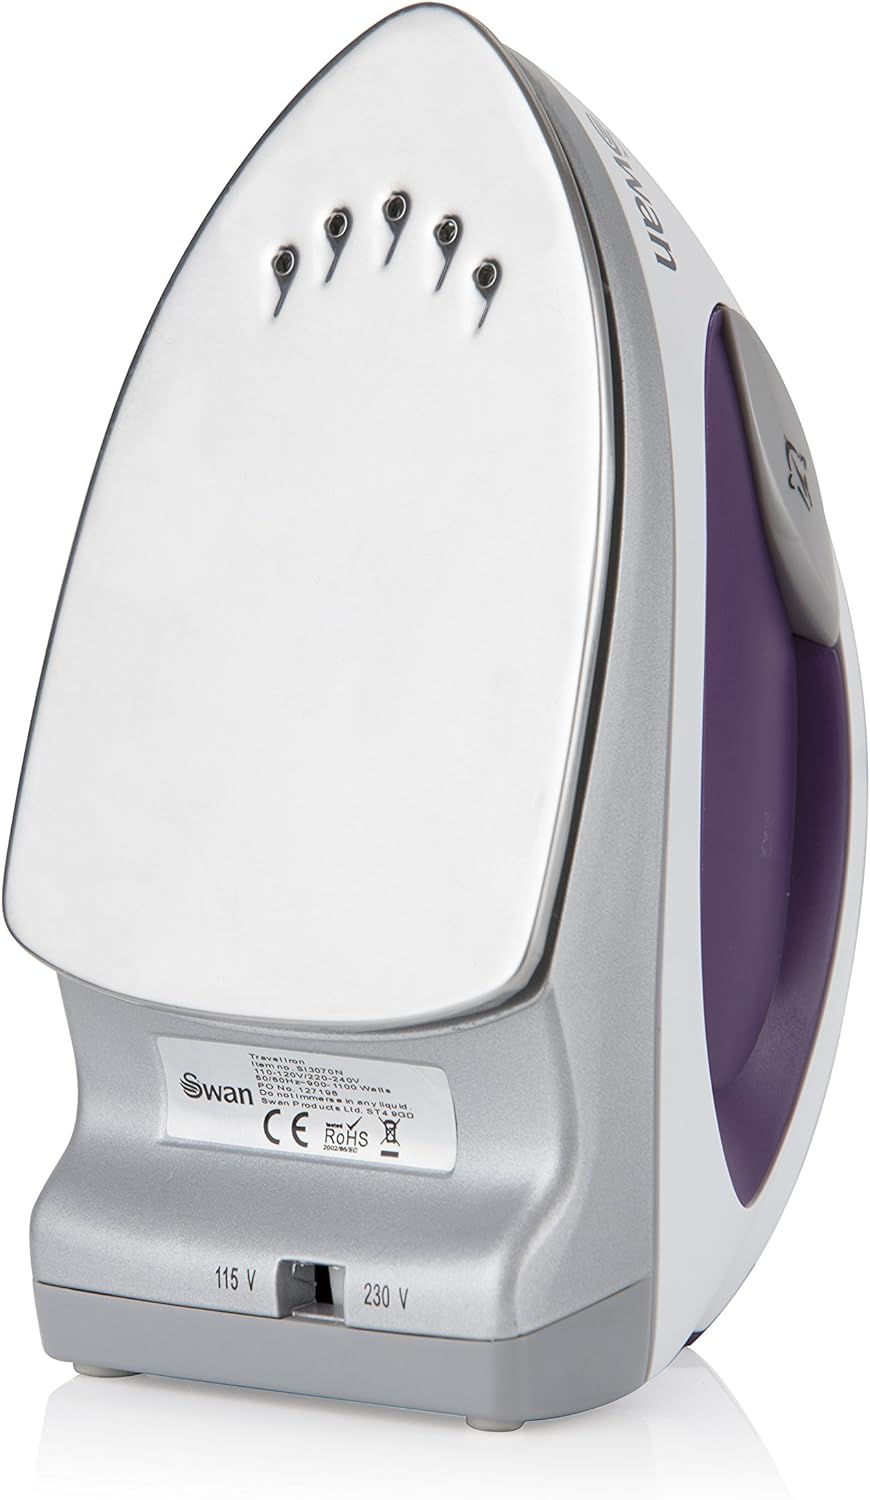 Swan SI3070N Compact Fast Heat up Steam Travel Iron -4566